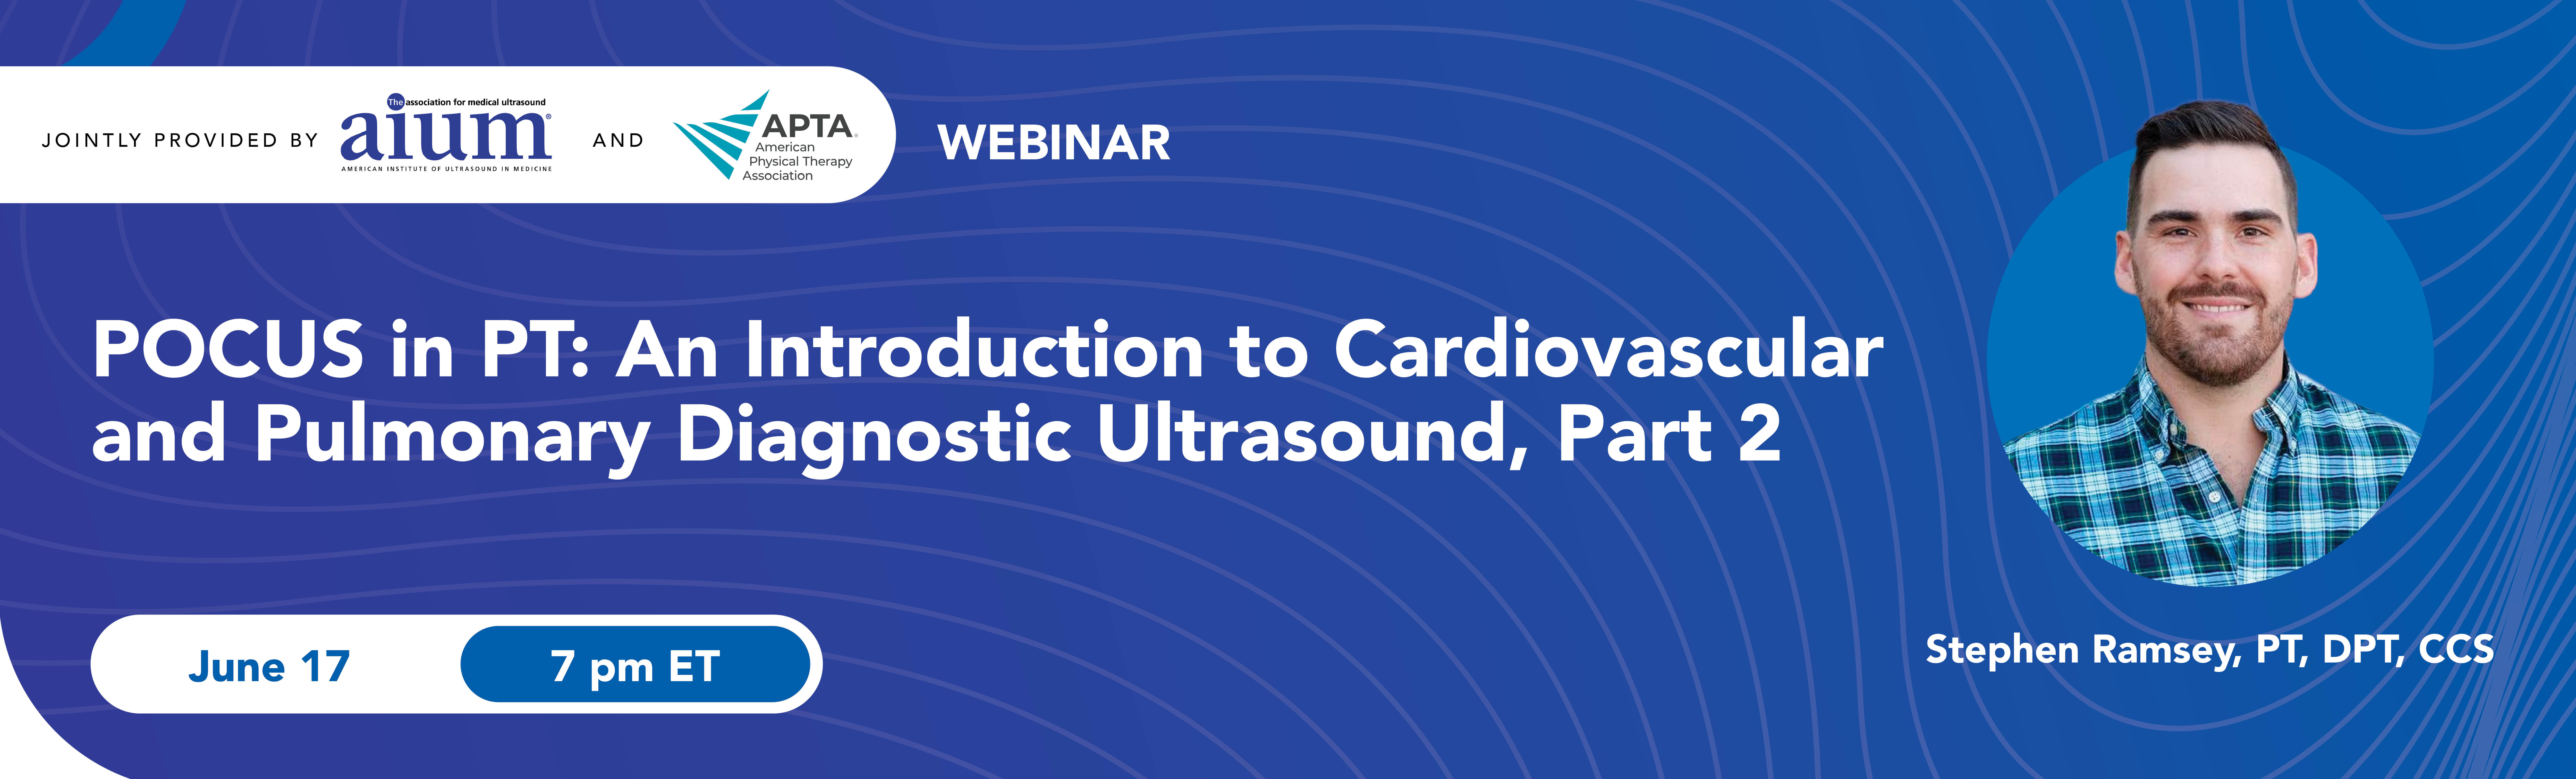 POCUS in PT: An Introduction to Cardiovascular and Pulmonary Diagnostic Ultrasound, Part 2